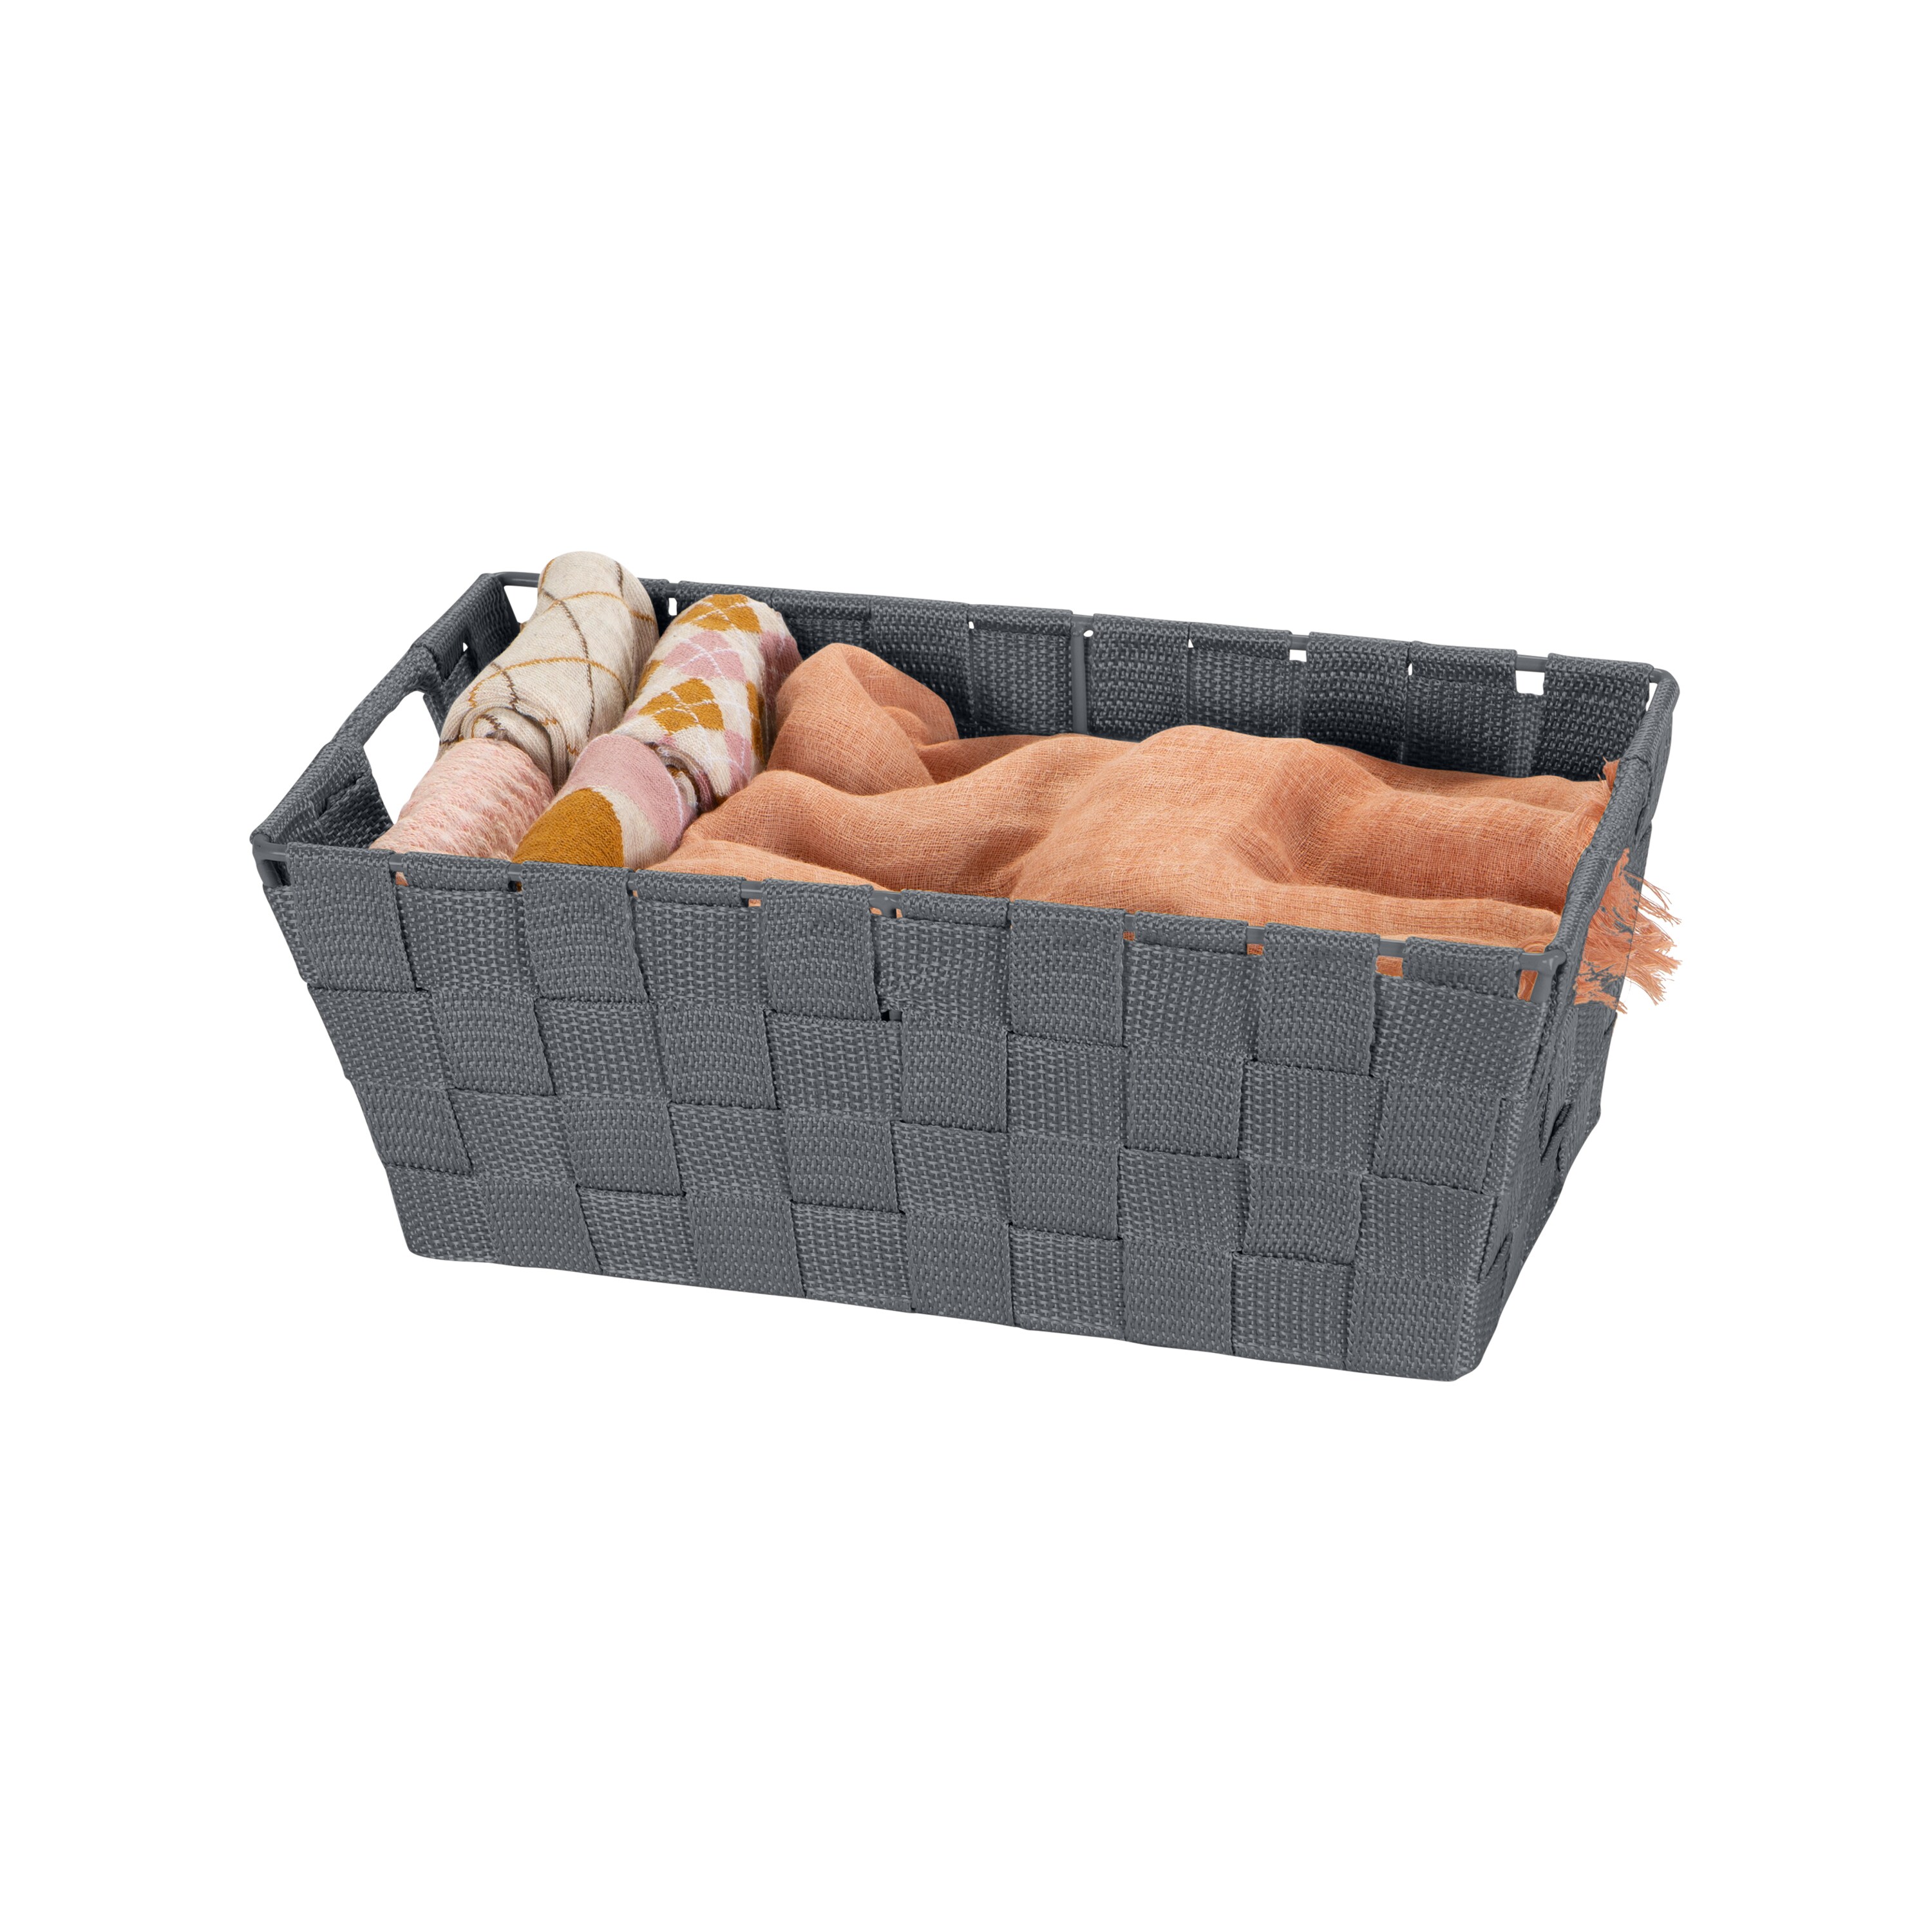 HENNEZ 40L Storage Basket for IKEA KALLAX - Foldable Small Basket for Laundry - Fabric Storage Bins Bamboo - Collapsible Storage Baskets for